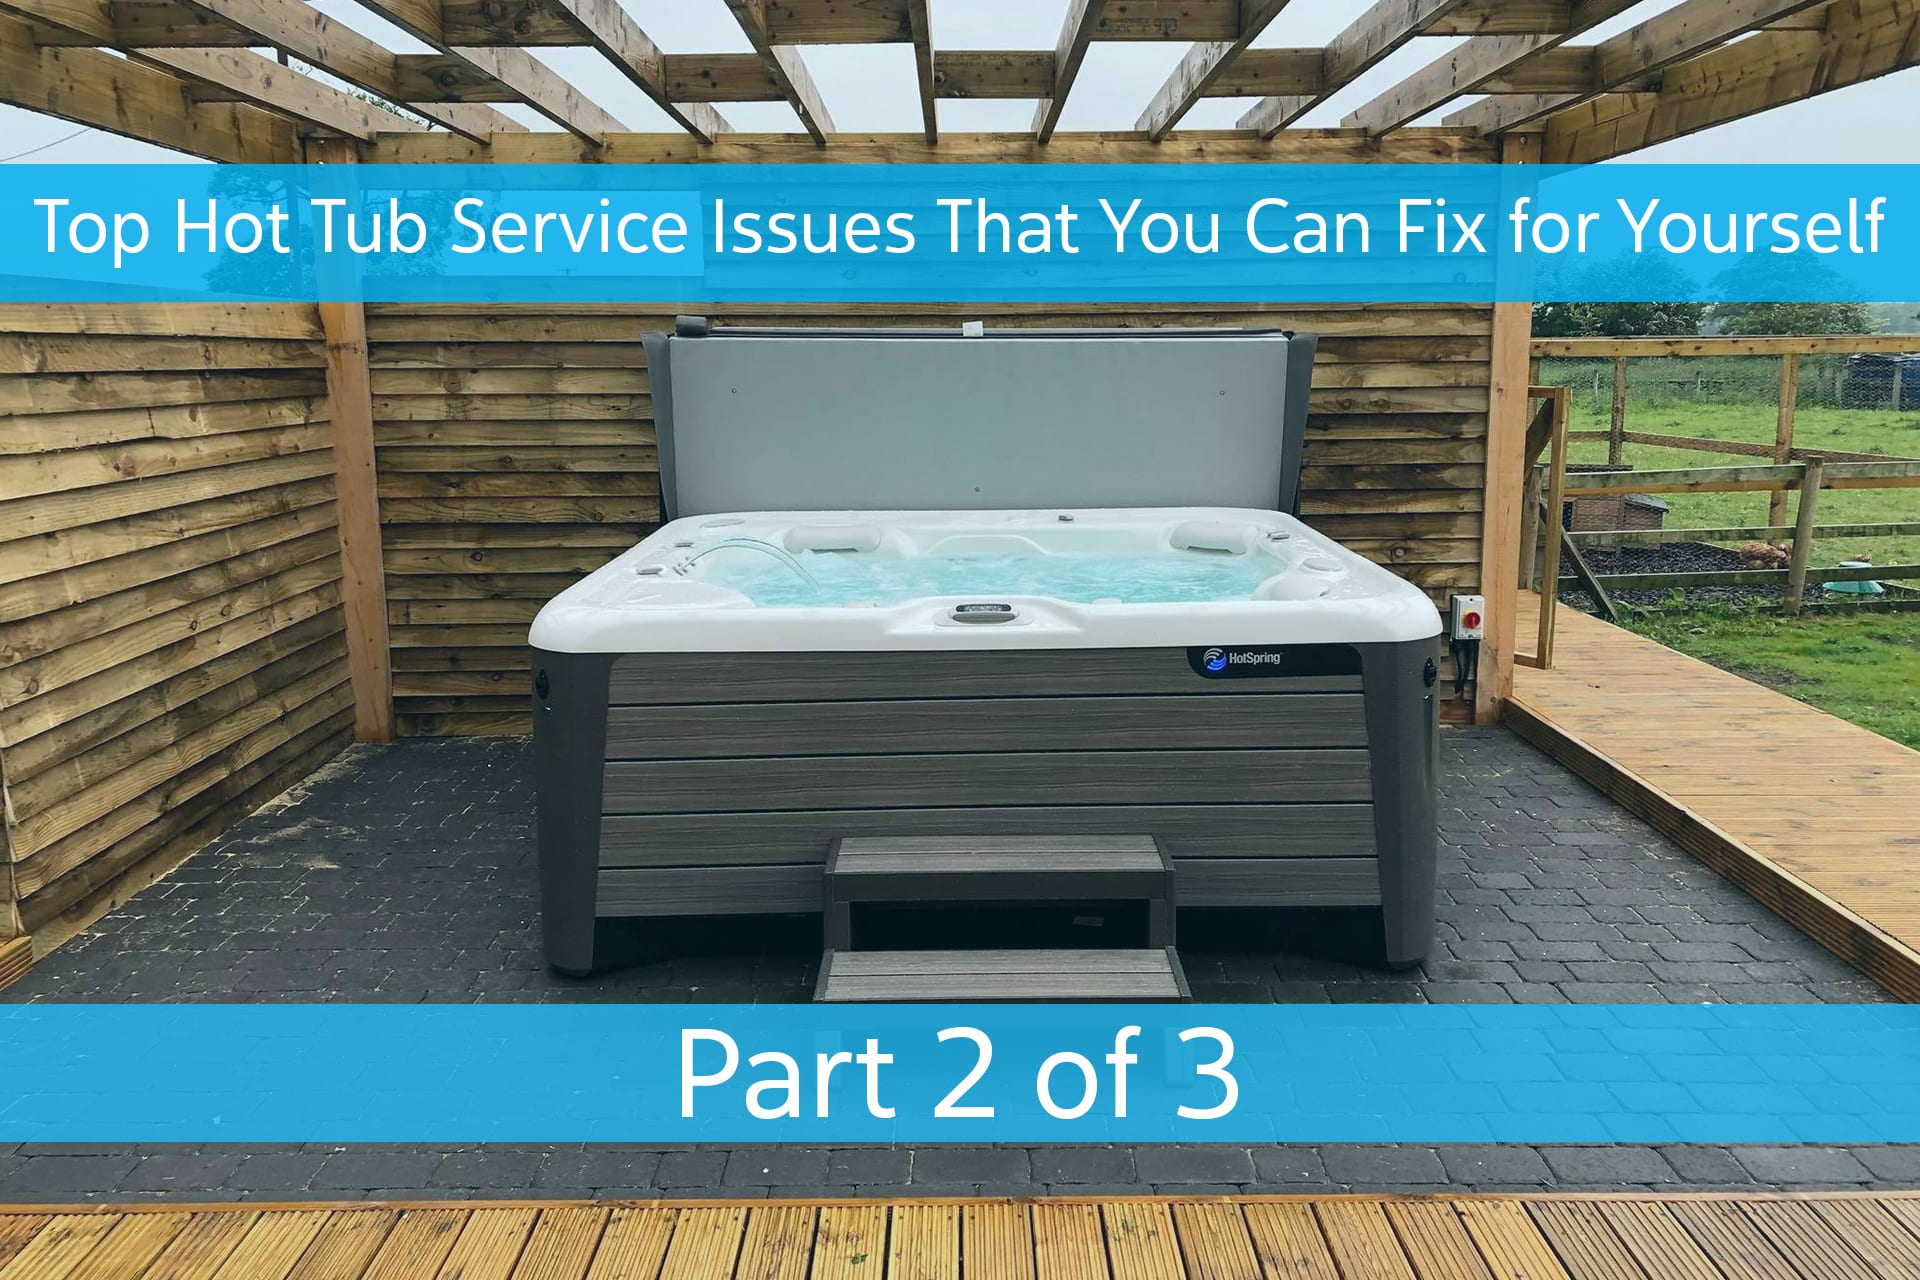 Top Hot Tub Service Issues That You Can Fix for Yourself – Part 2 of 3